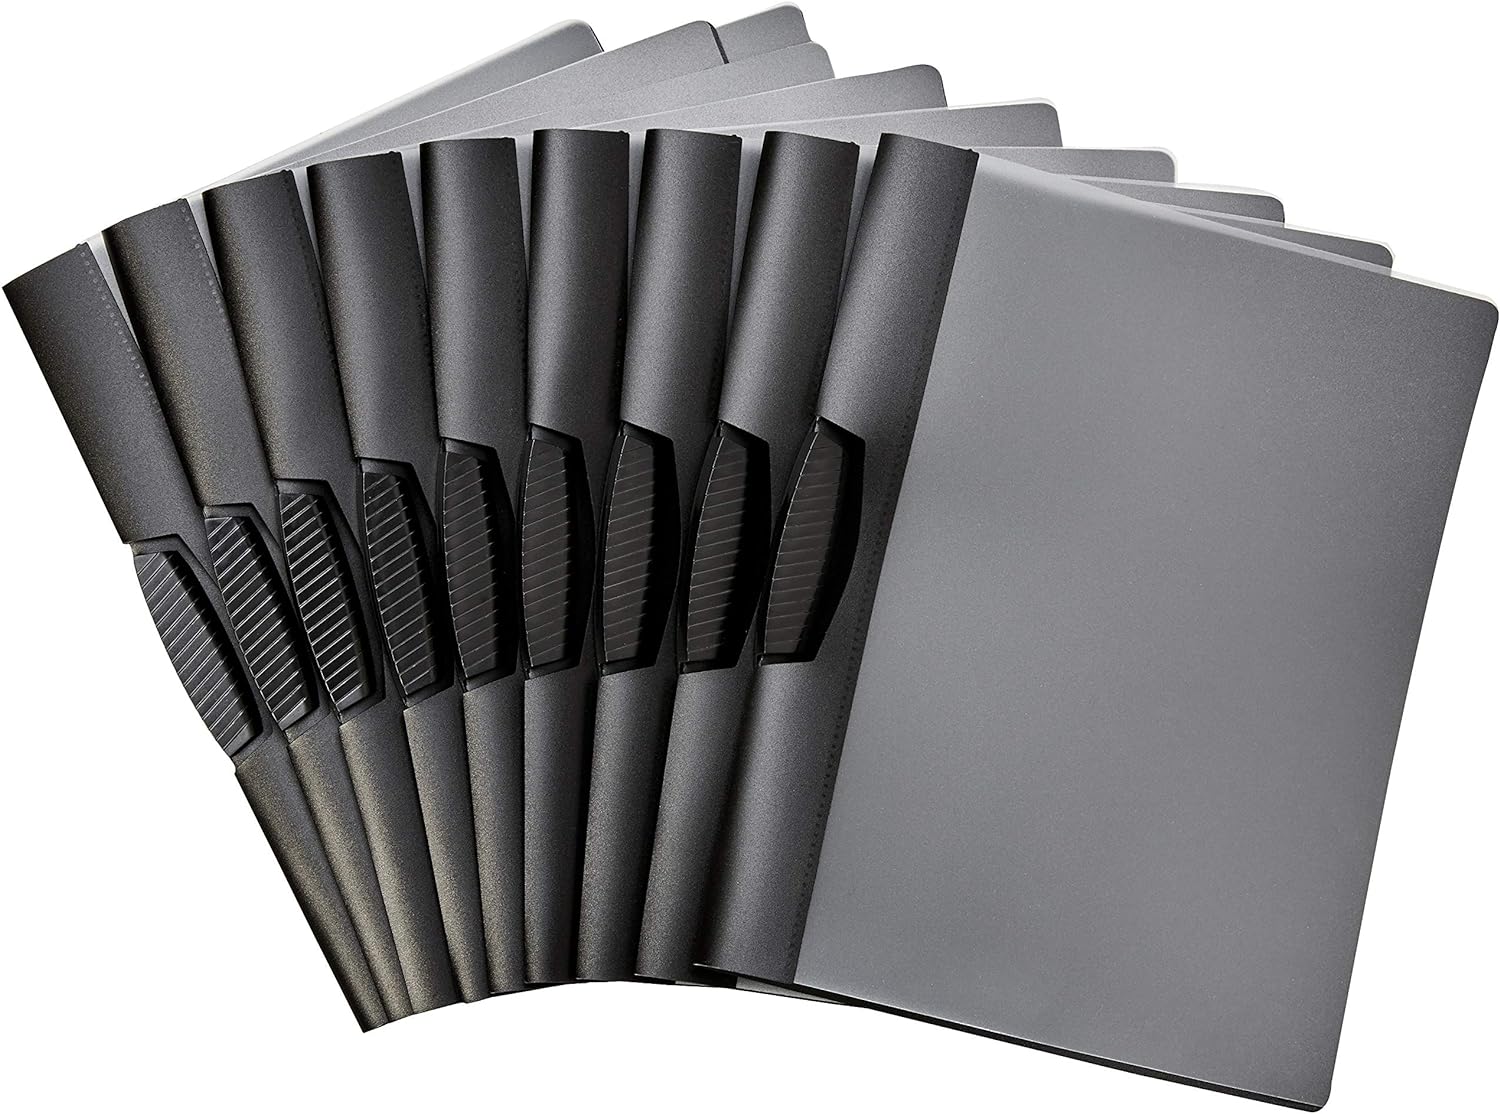 Amazon Basics Report Folder Cover with Clip, Pack of 10, Grey 2823